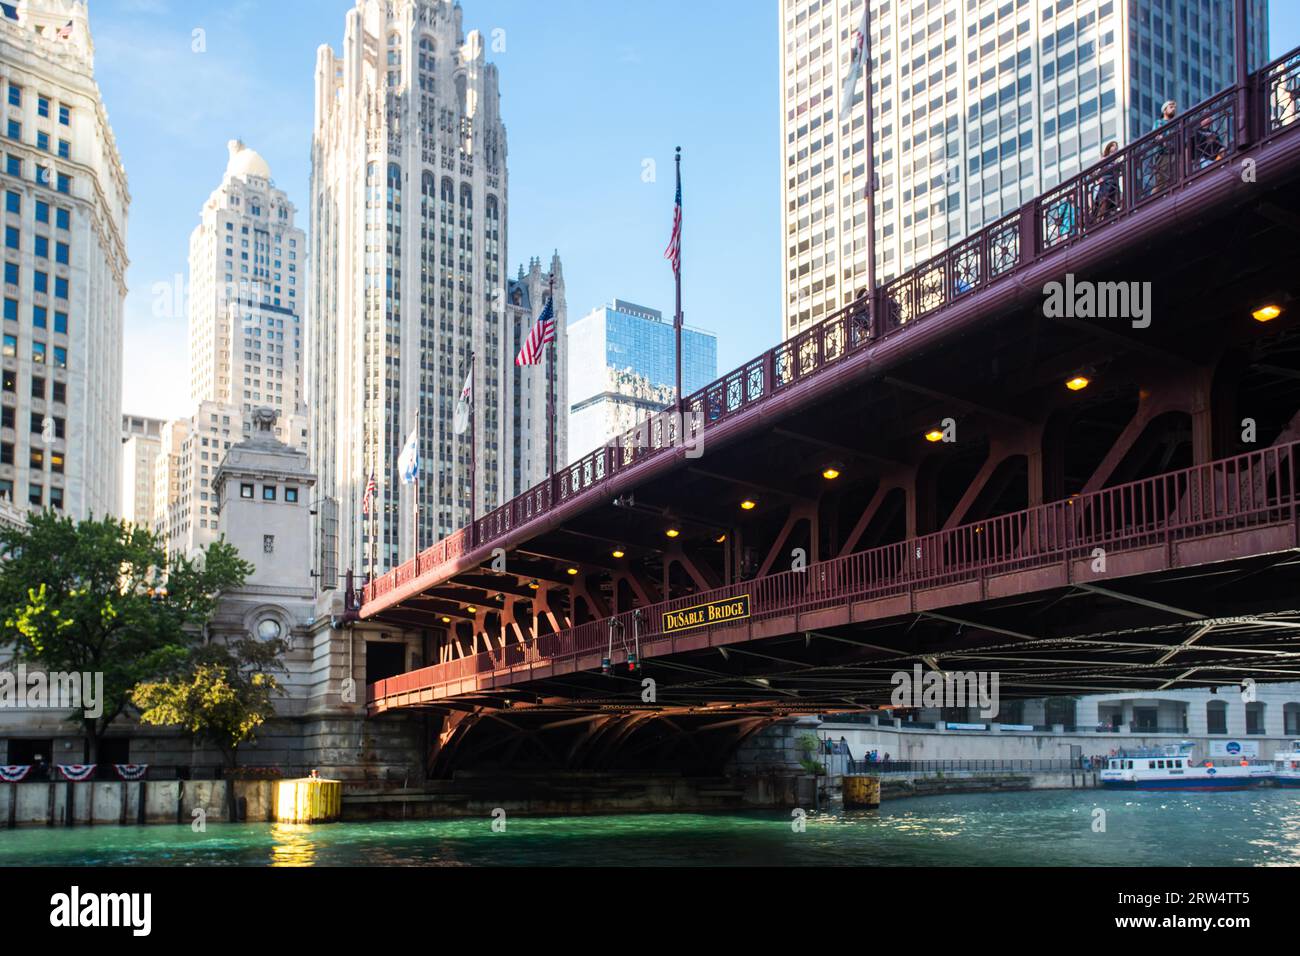 The iconic DuSable bridge and Michigan Ave in Chicago, Illinois, USA on a hot summer's day Stock Photo